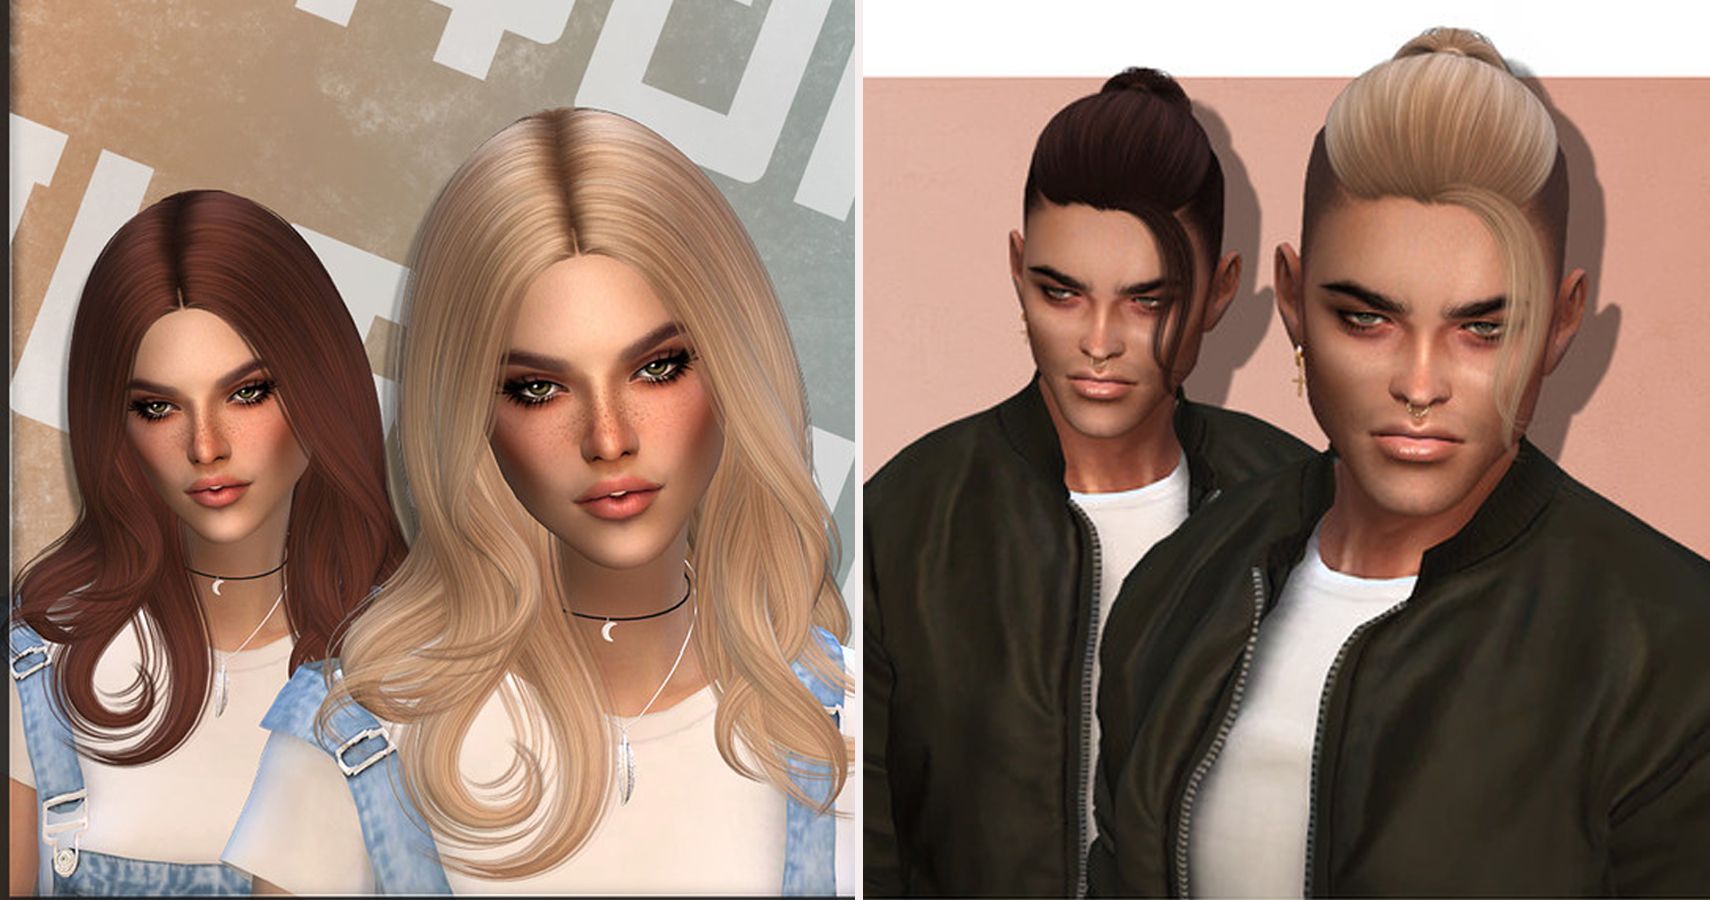 Left side 2 sims with long wavy hair. Right side two sims with man buns